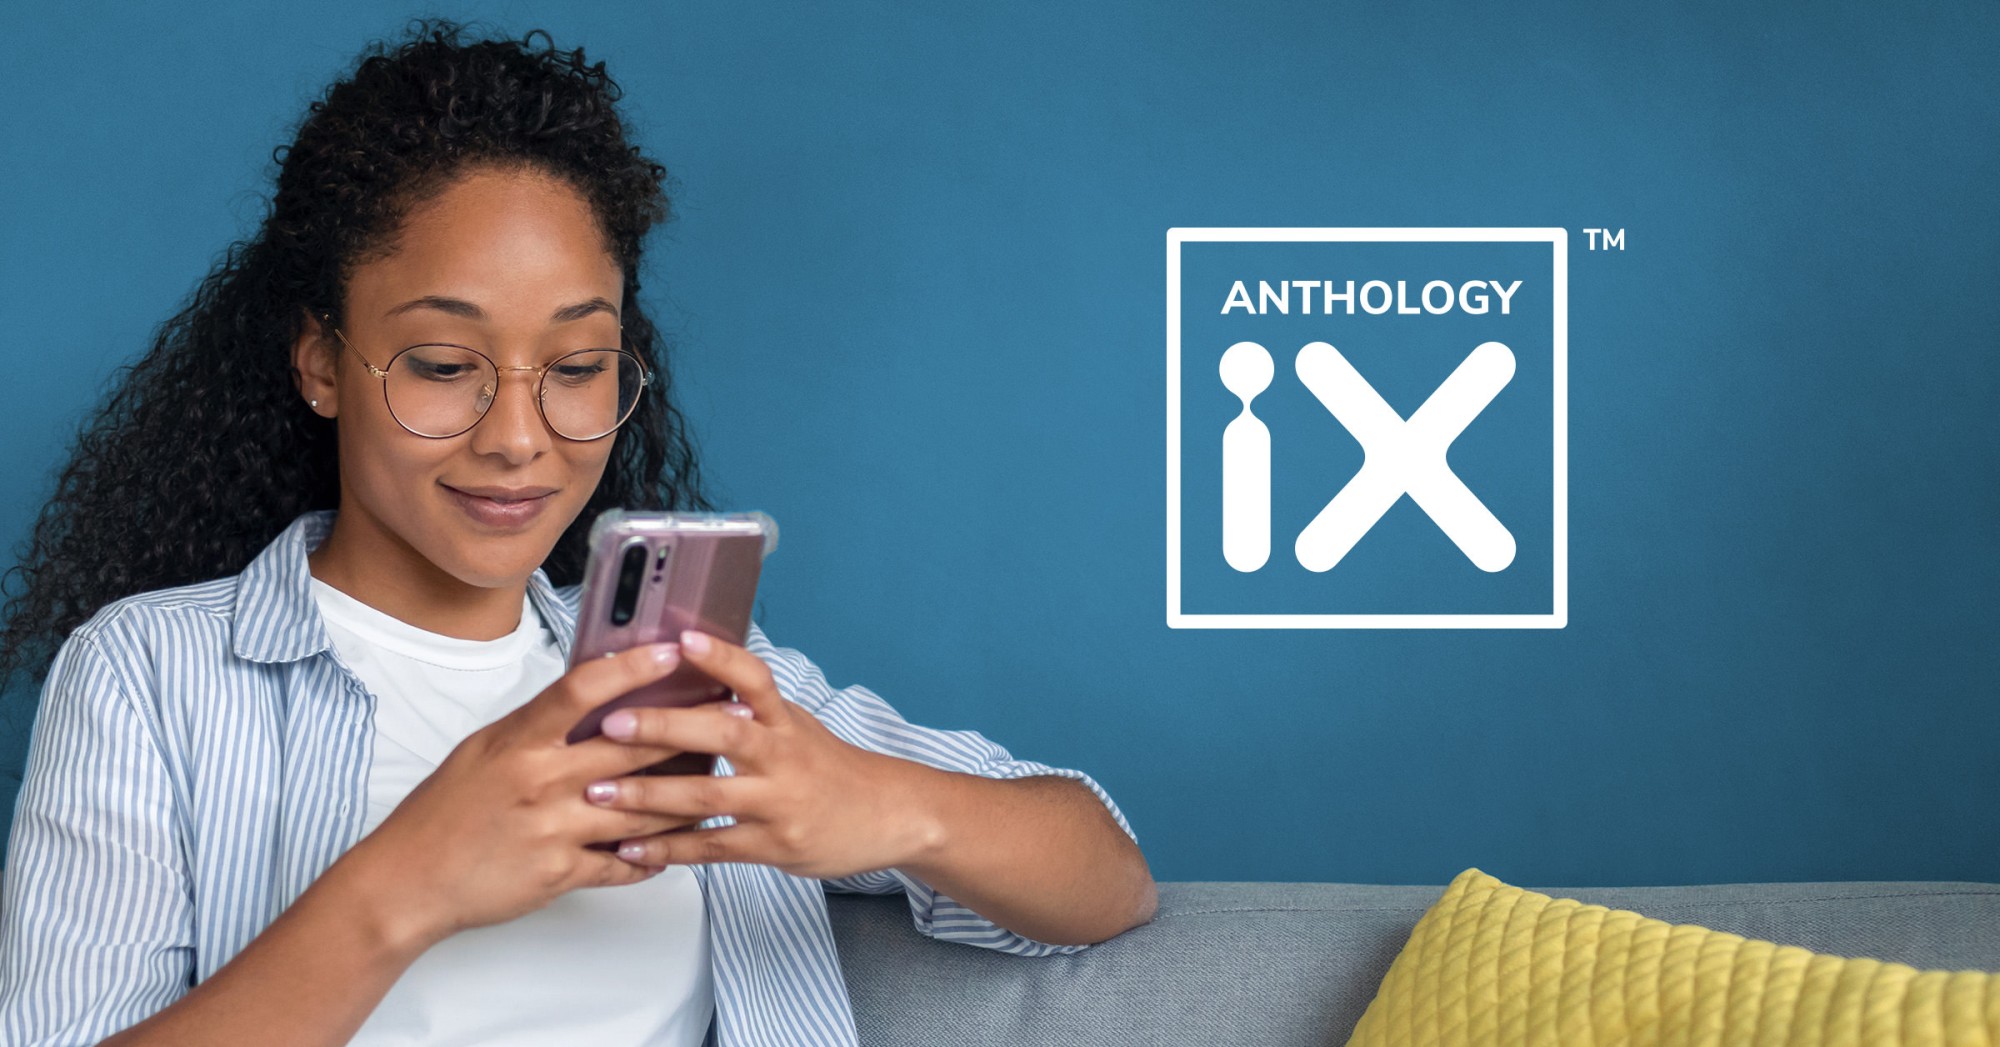 Photo of a person working on their phone with the Anthology iX logo overlayed